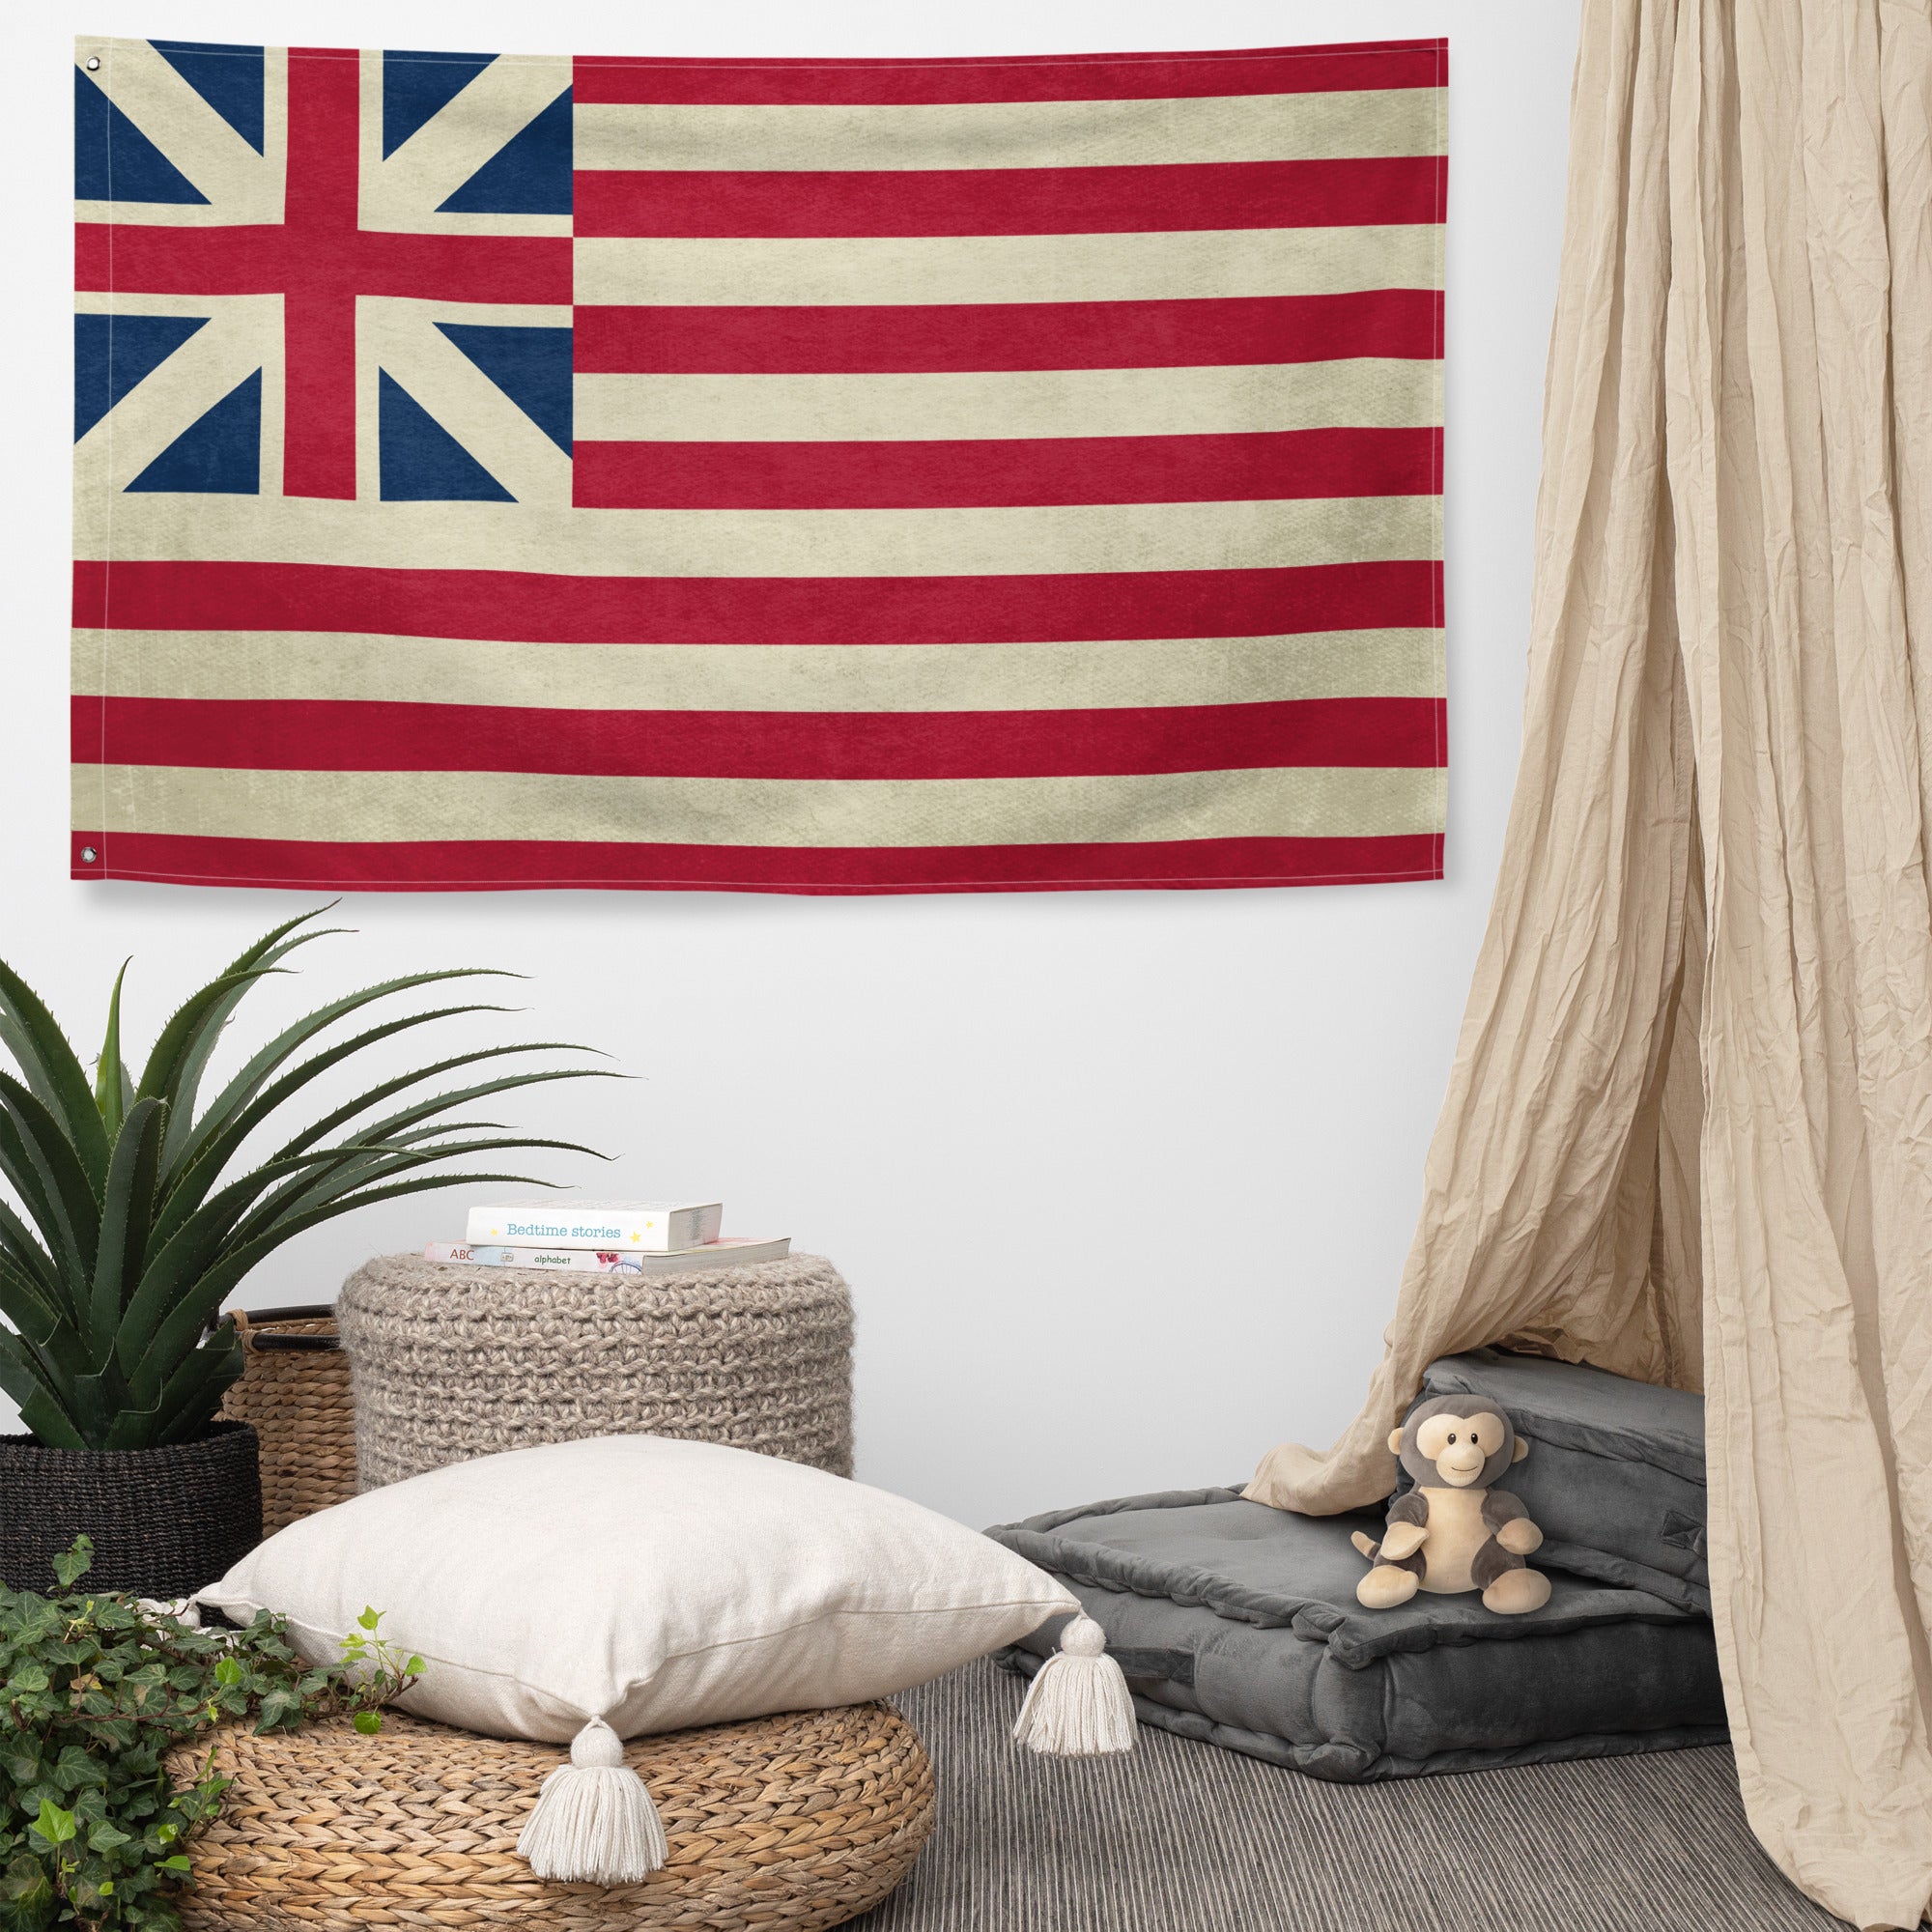 Continental Colors American Grand Union 1775 Wall Flag